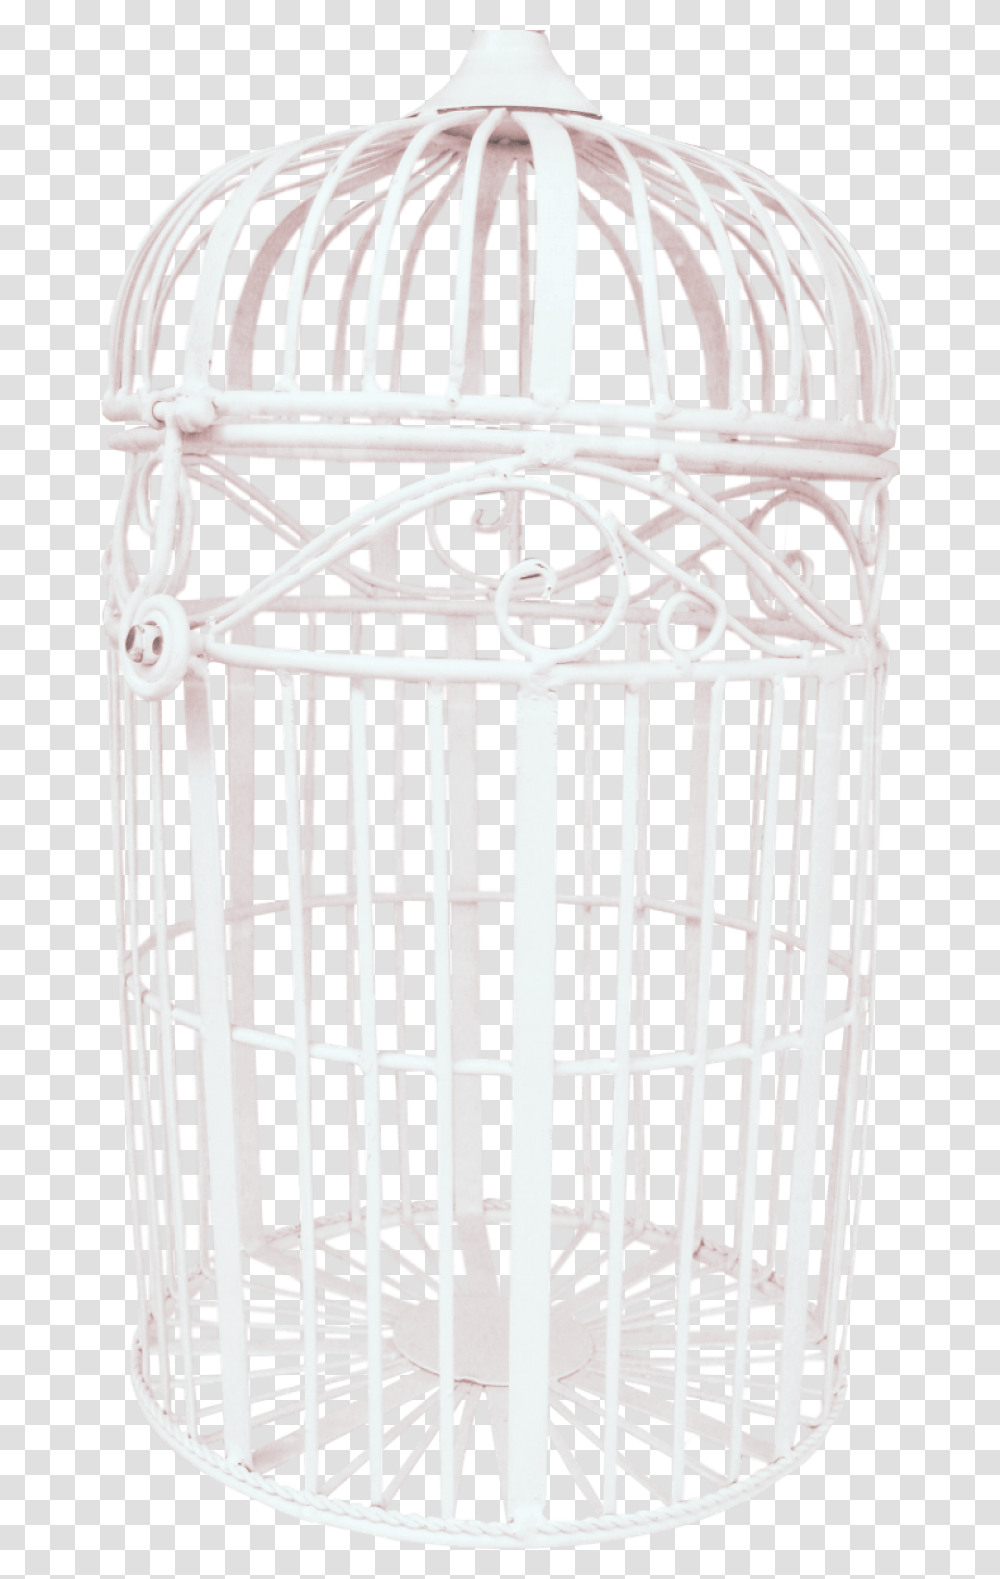 Download Bird Cage Image For Free Cage, Furniture, Gate, Cushion, Screen Transparent Png